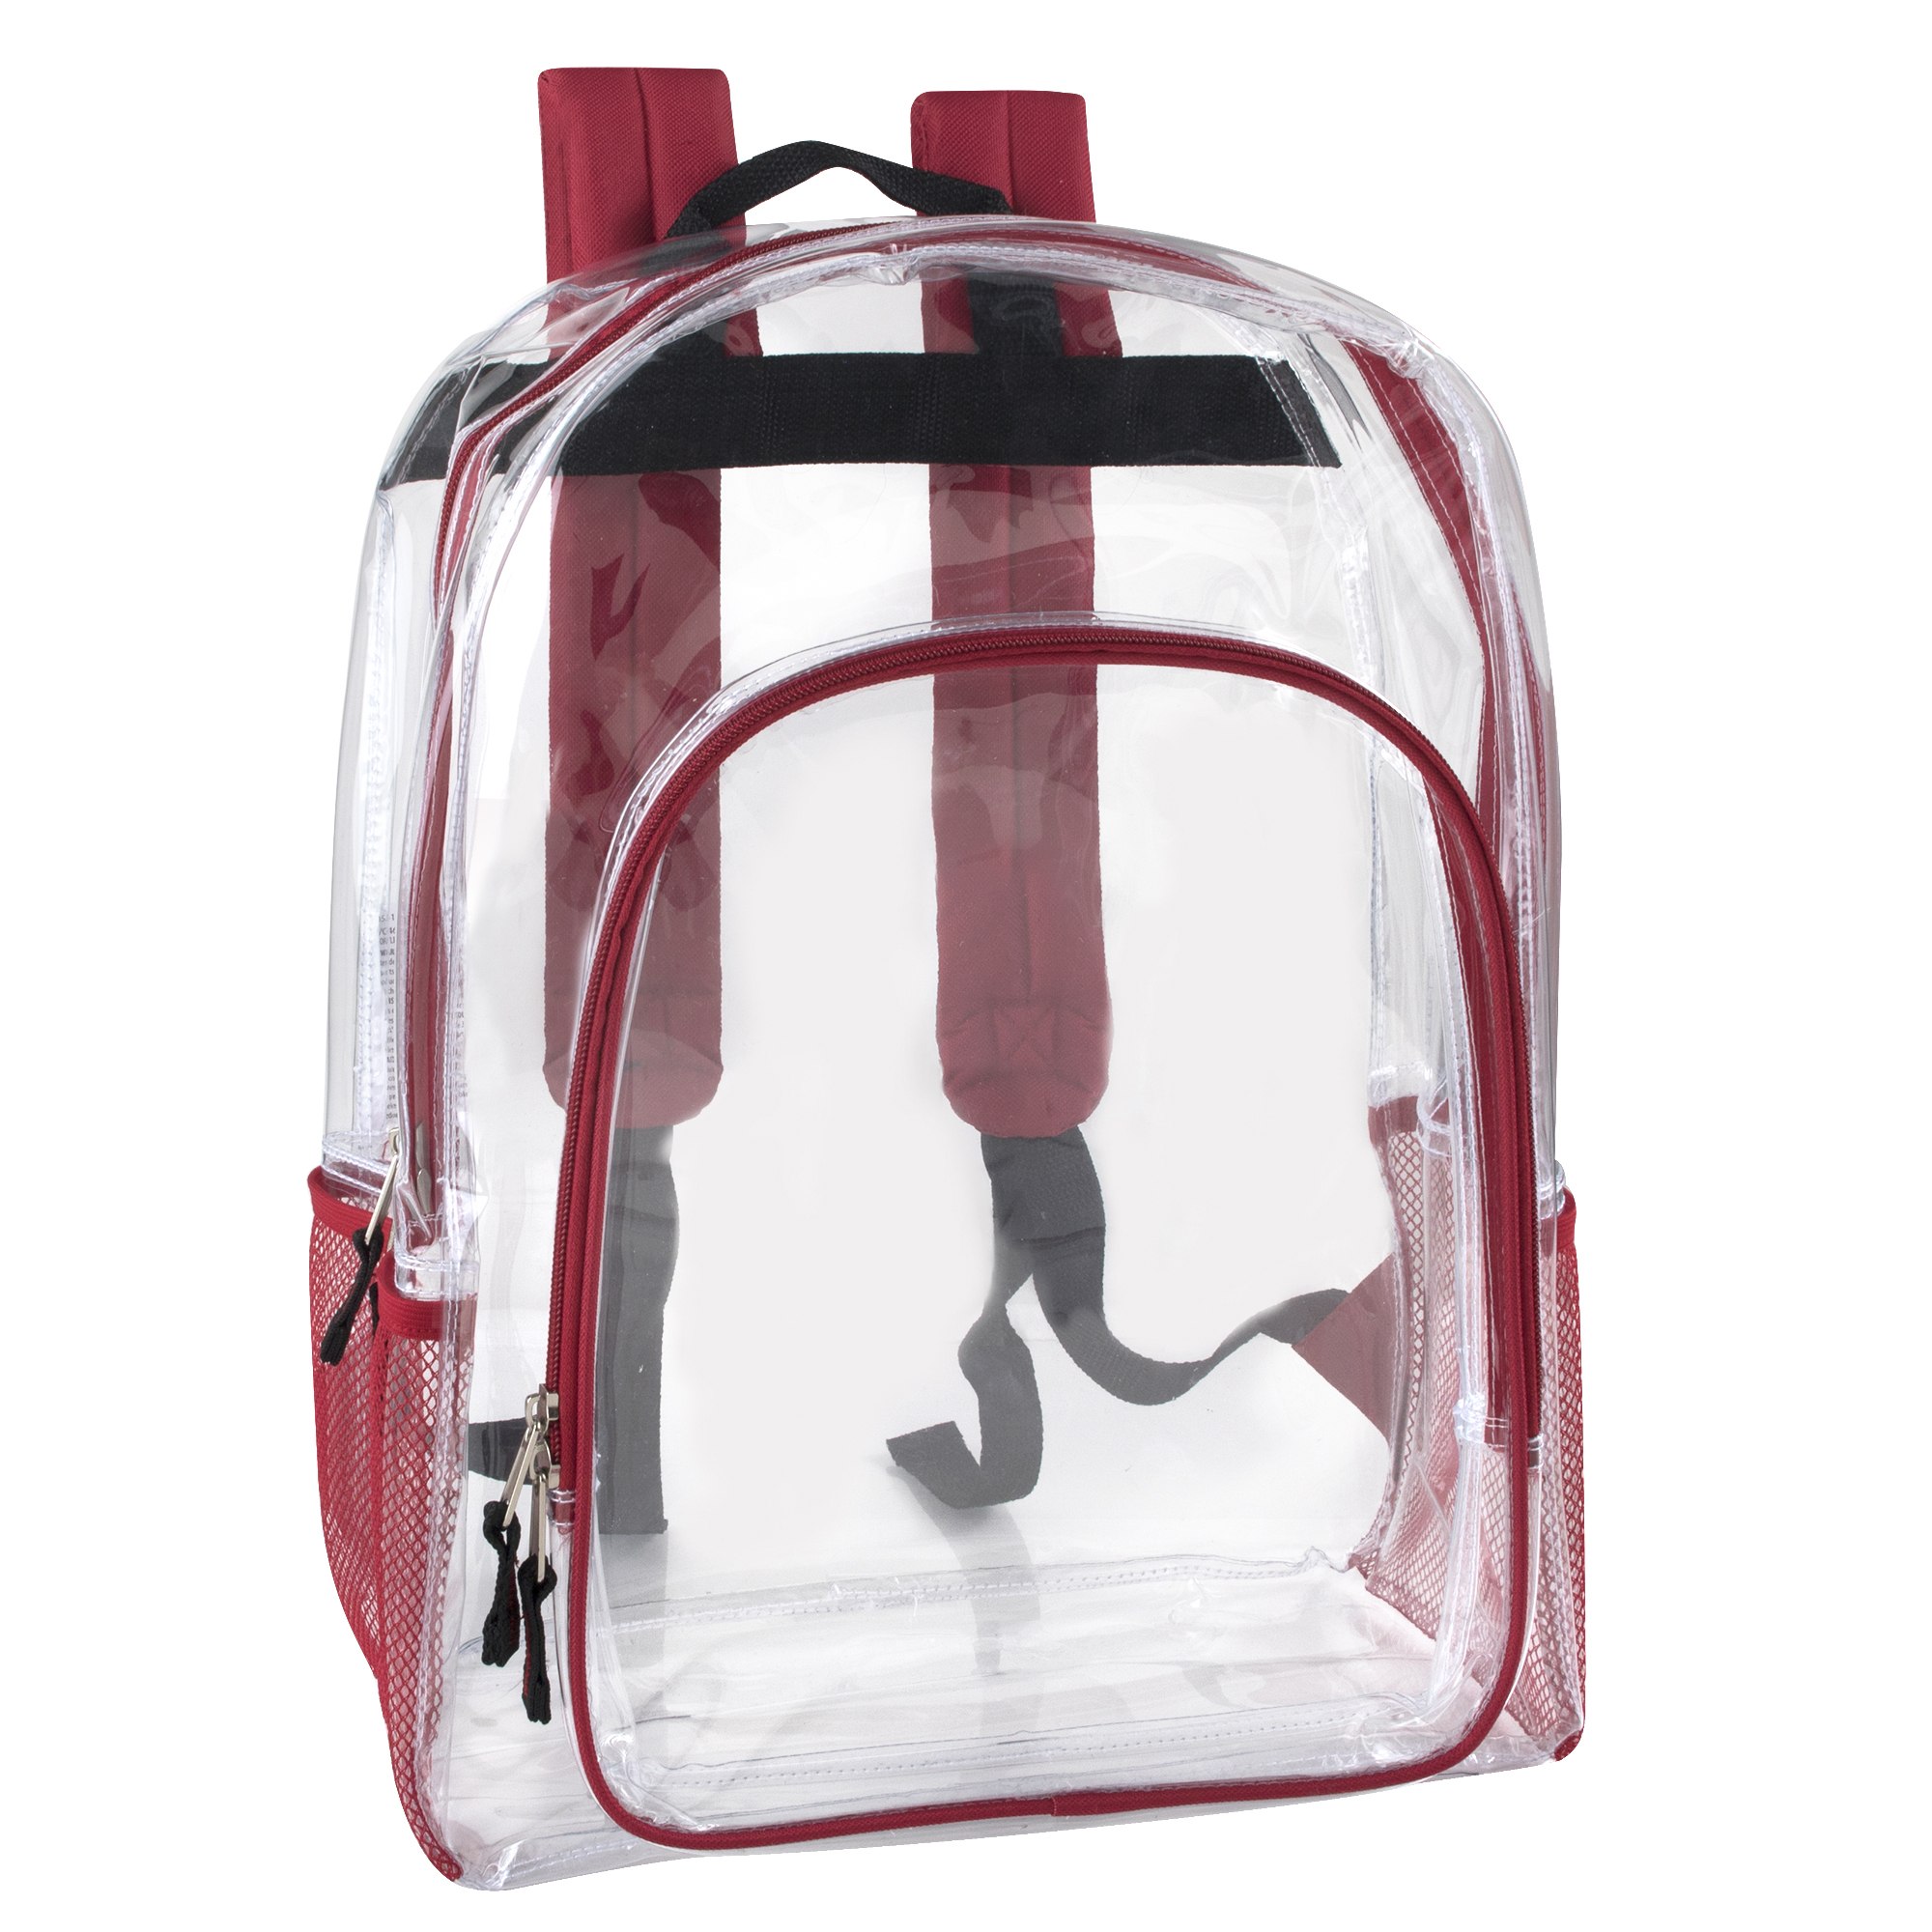 Trailmaker Carrying Case (Backpack), Red - image 1 of 6